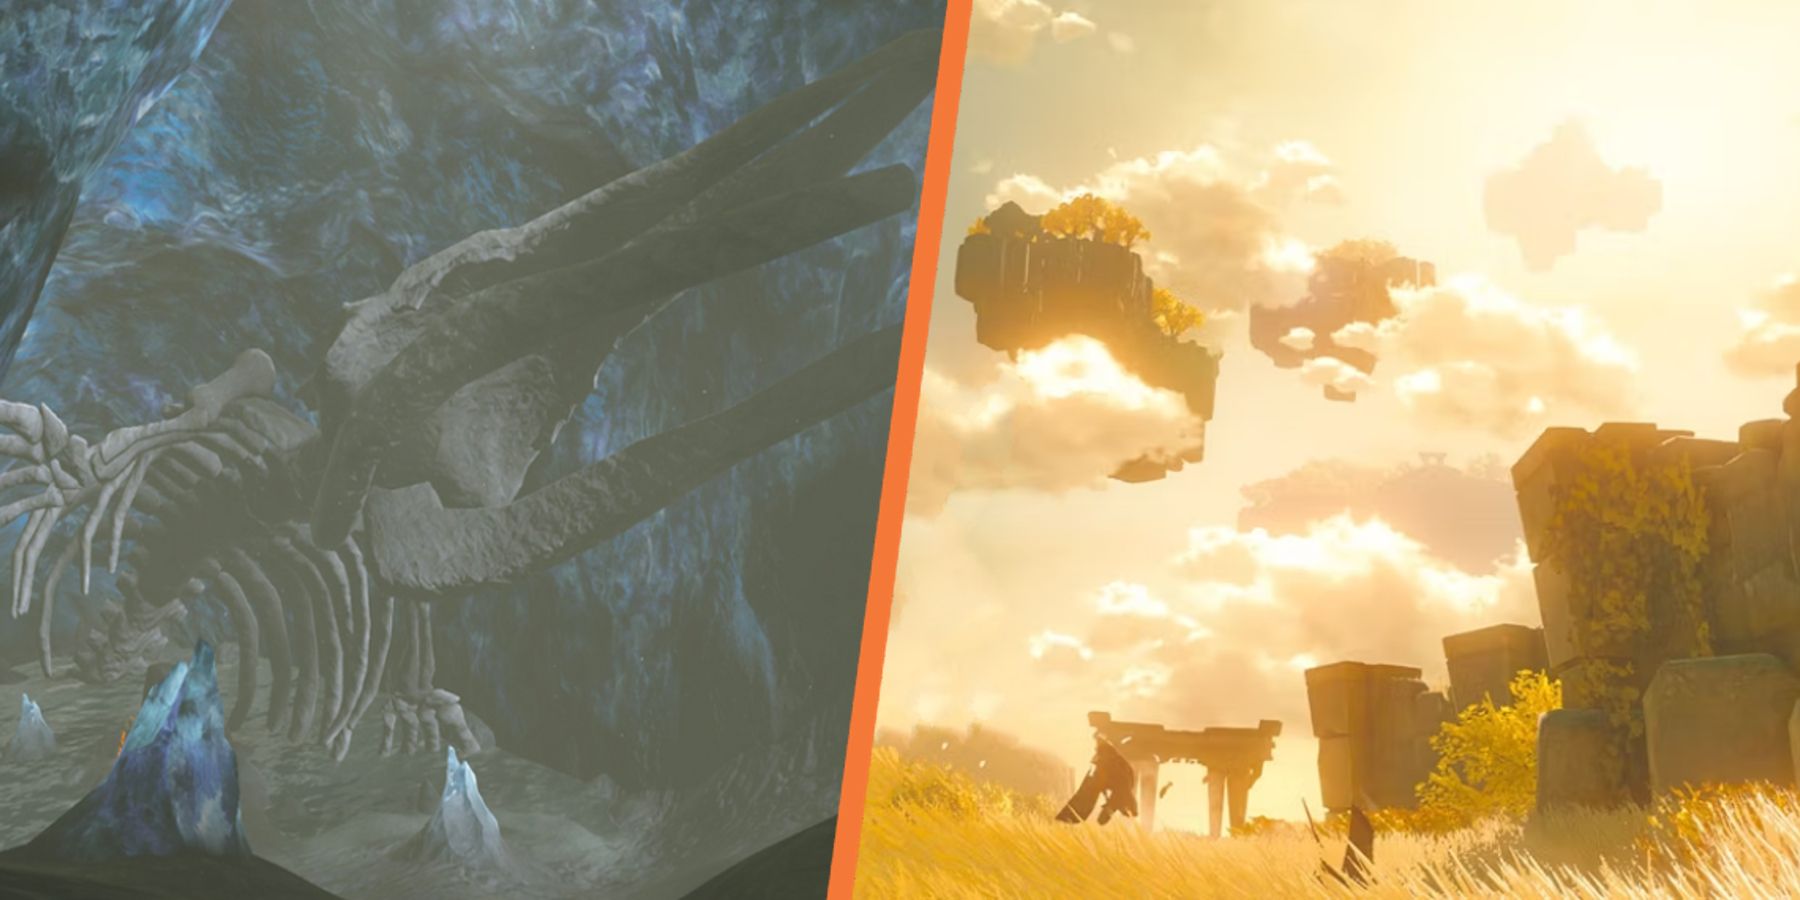 The Legend of Zelda: Tears of the Kingdom could unearth more about the Leviathans seen in Breath of the Wild thanks to the new sky islands.